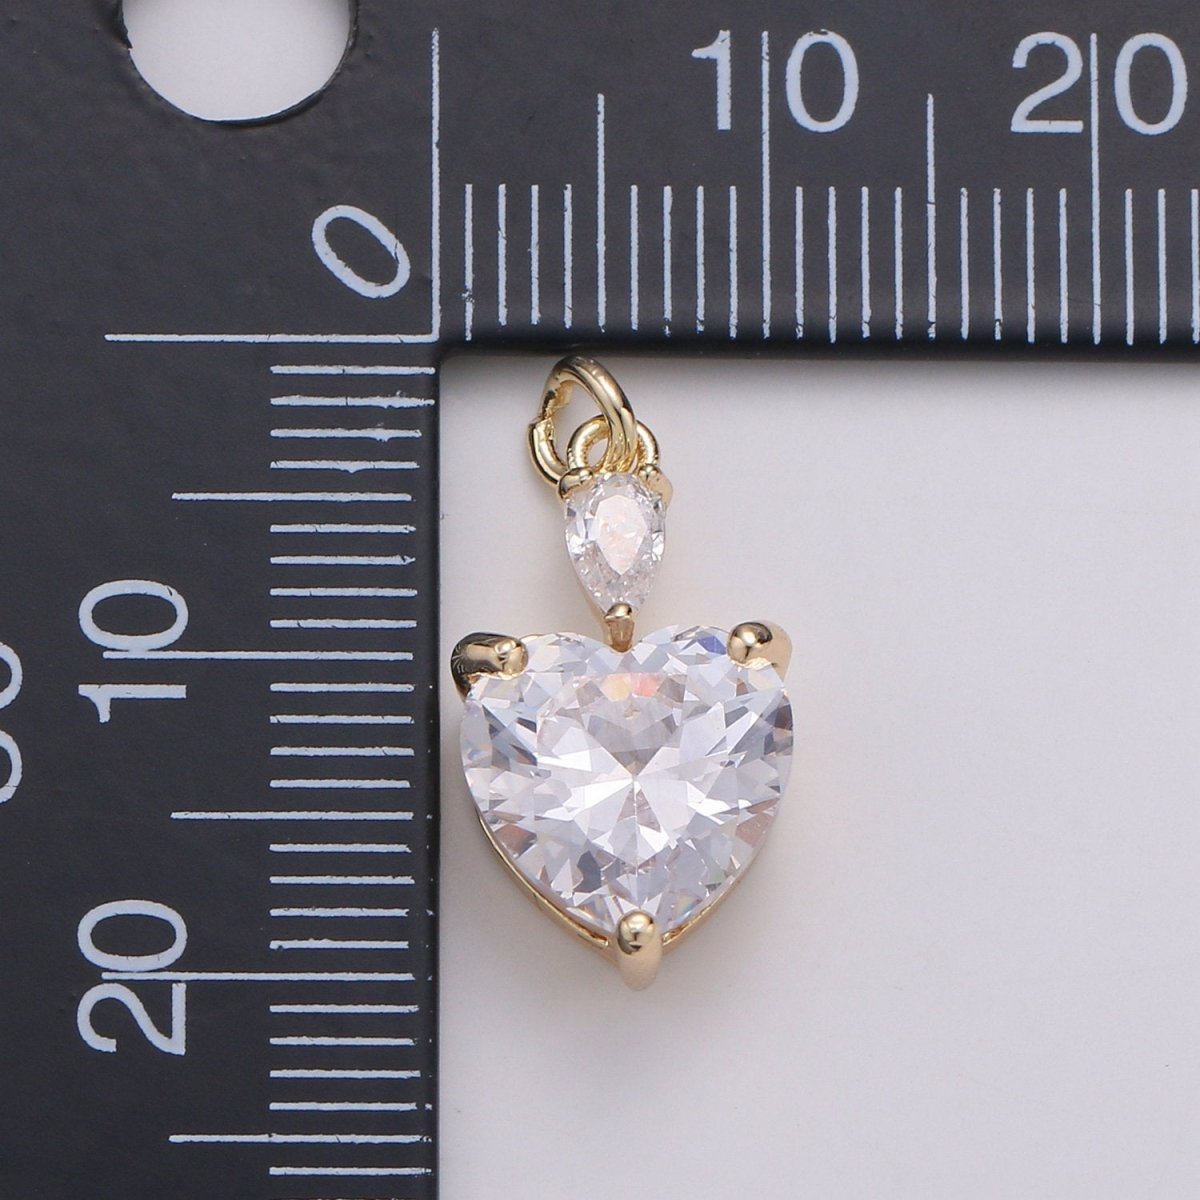 Mini 24k Gold Filled Pear & Heart Cubic Charms, Gold Filled Love Charm, Cubic Charm ,Gold Love Lock charm Relationship Jewelry Inspired D-155 - DLUXCA